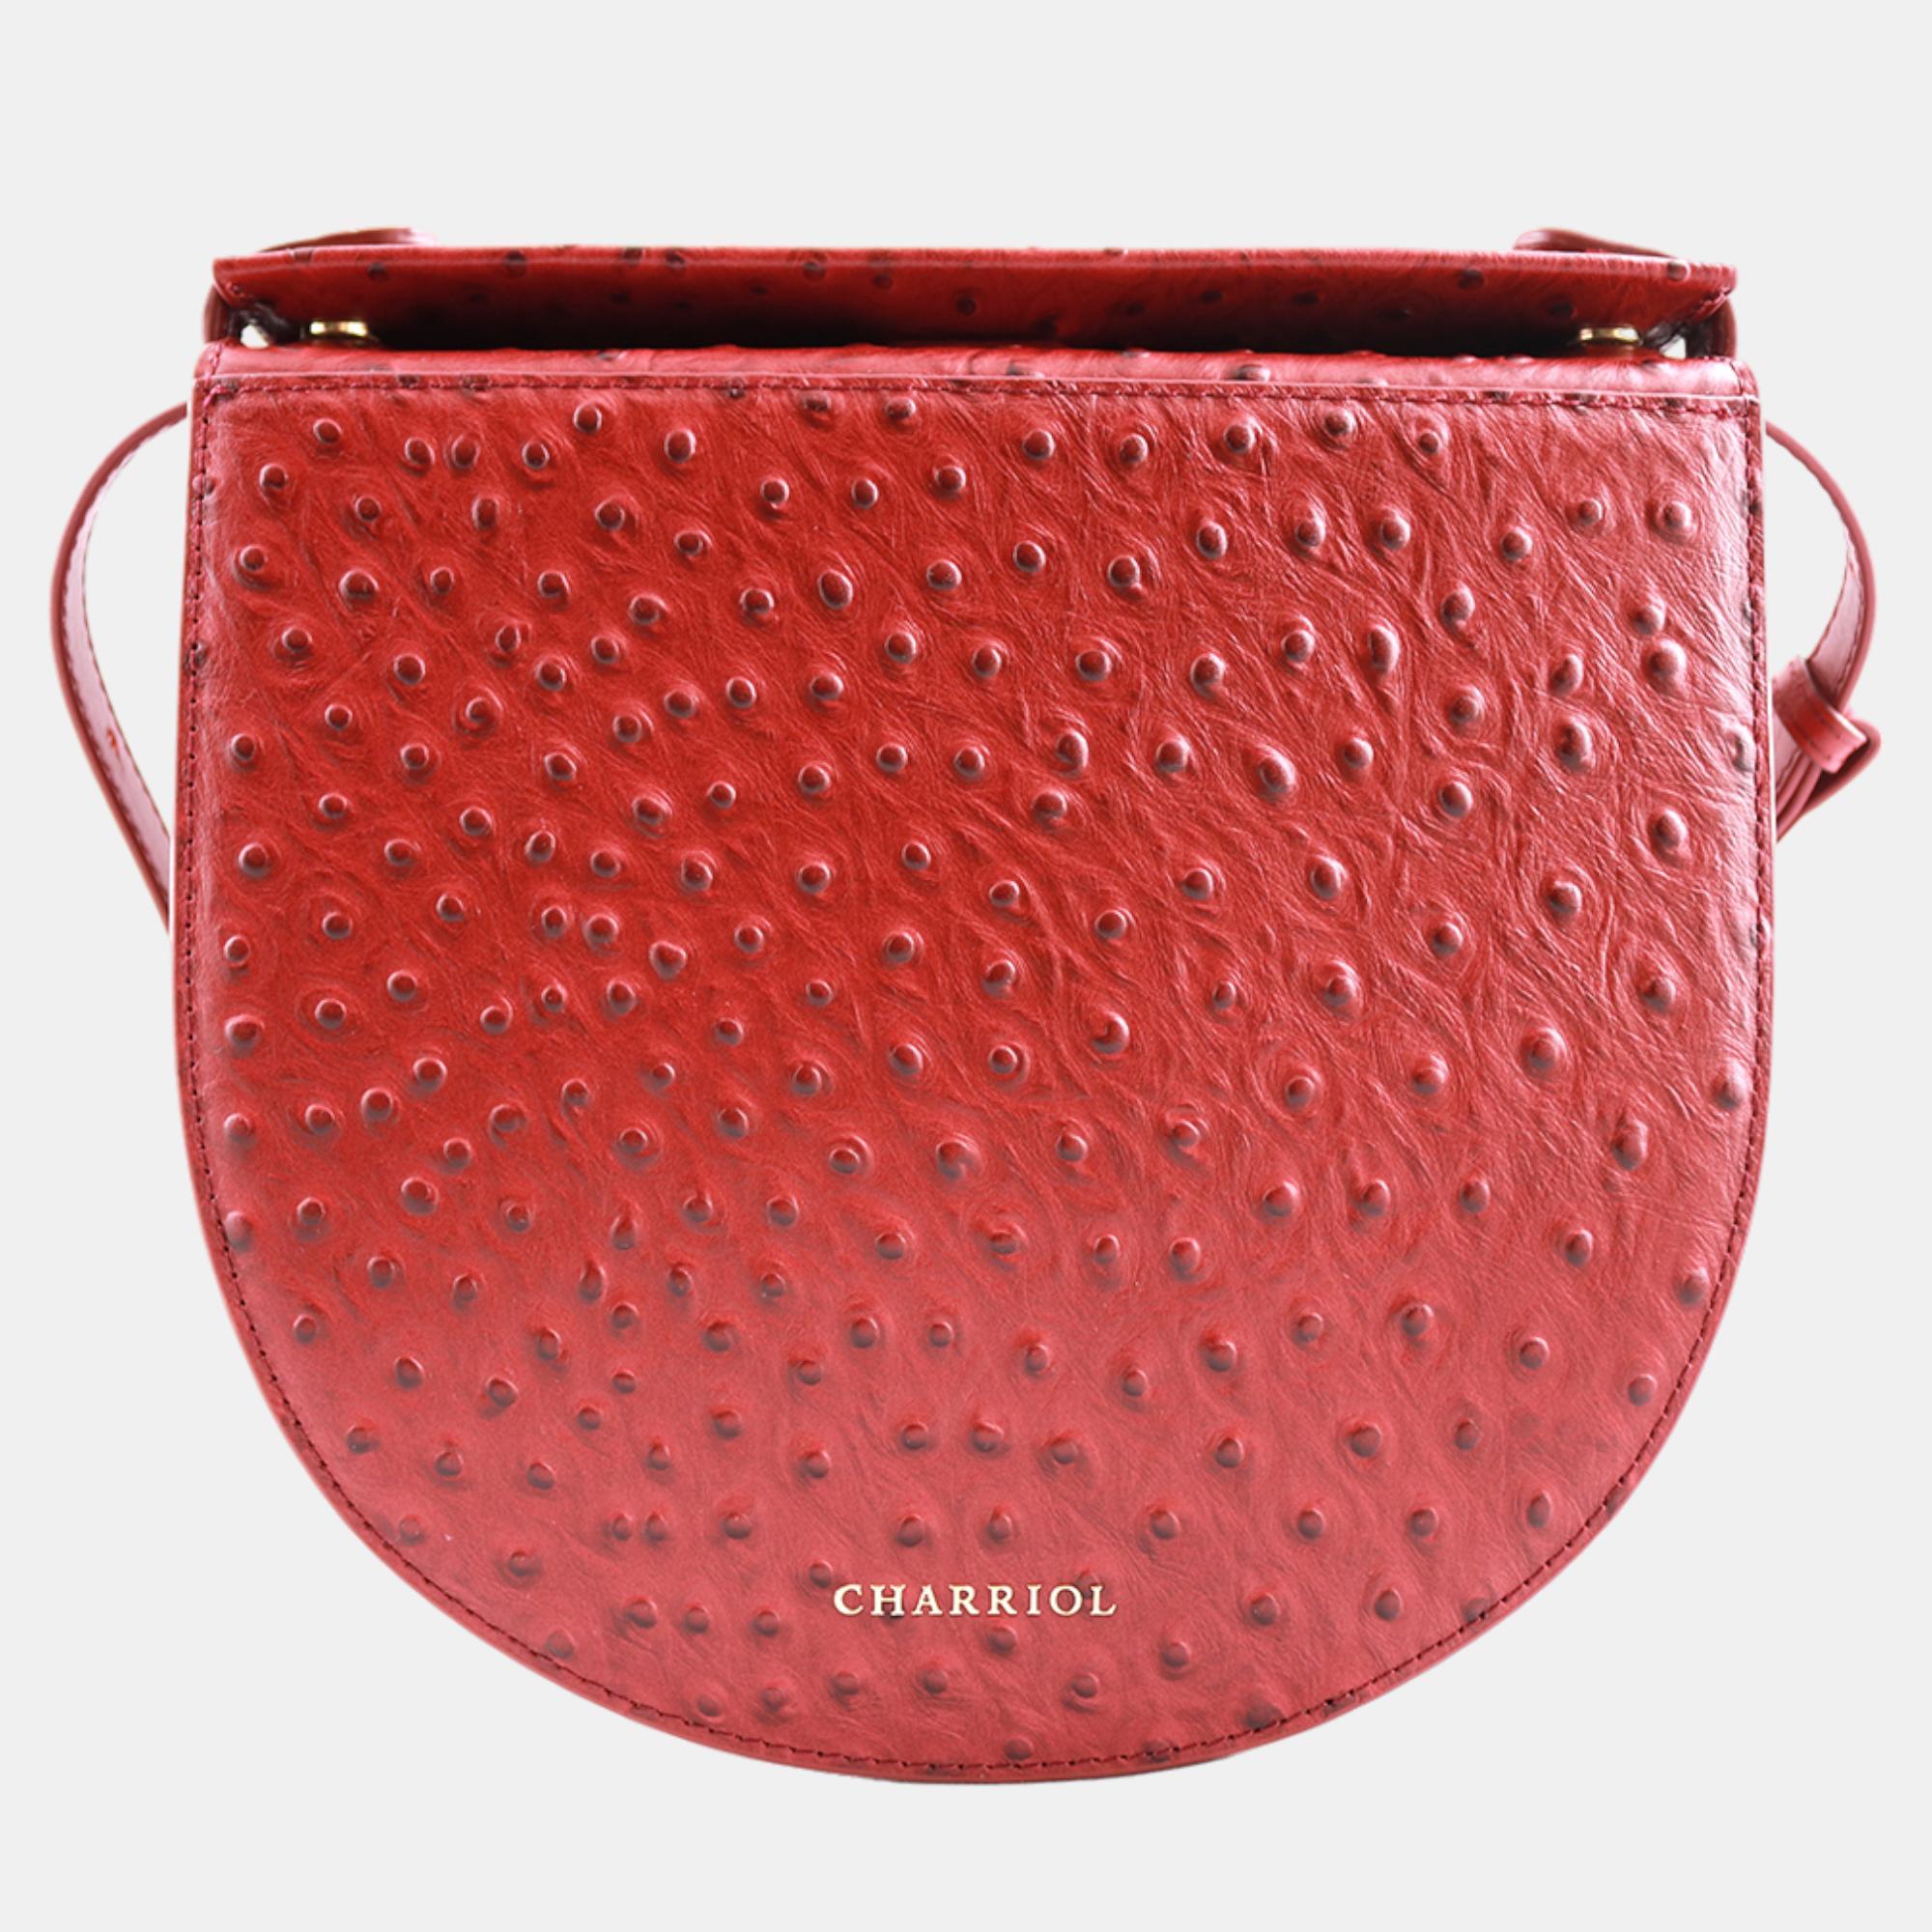 Charriol Bordeaux Leather Passion Ostrich Crossbody